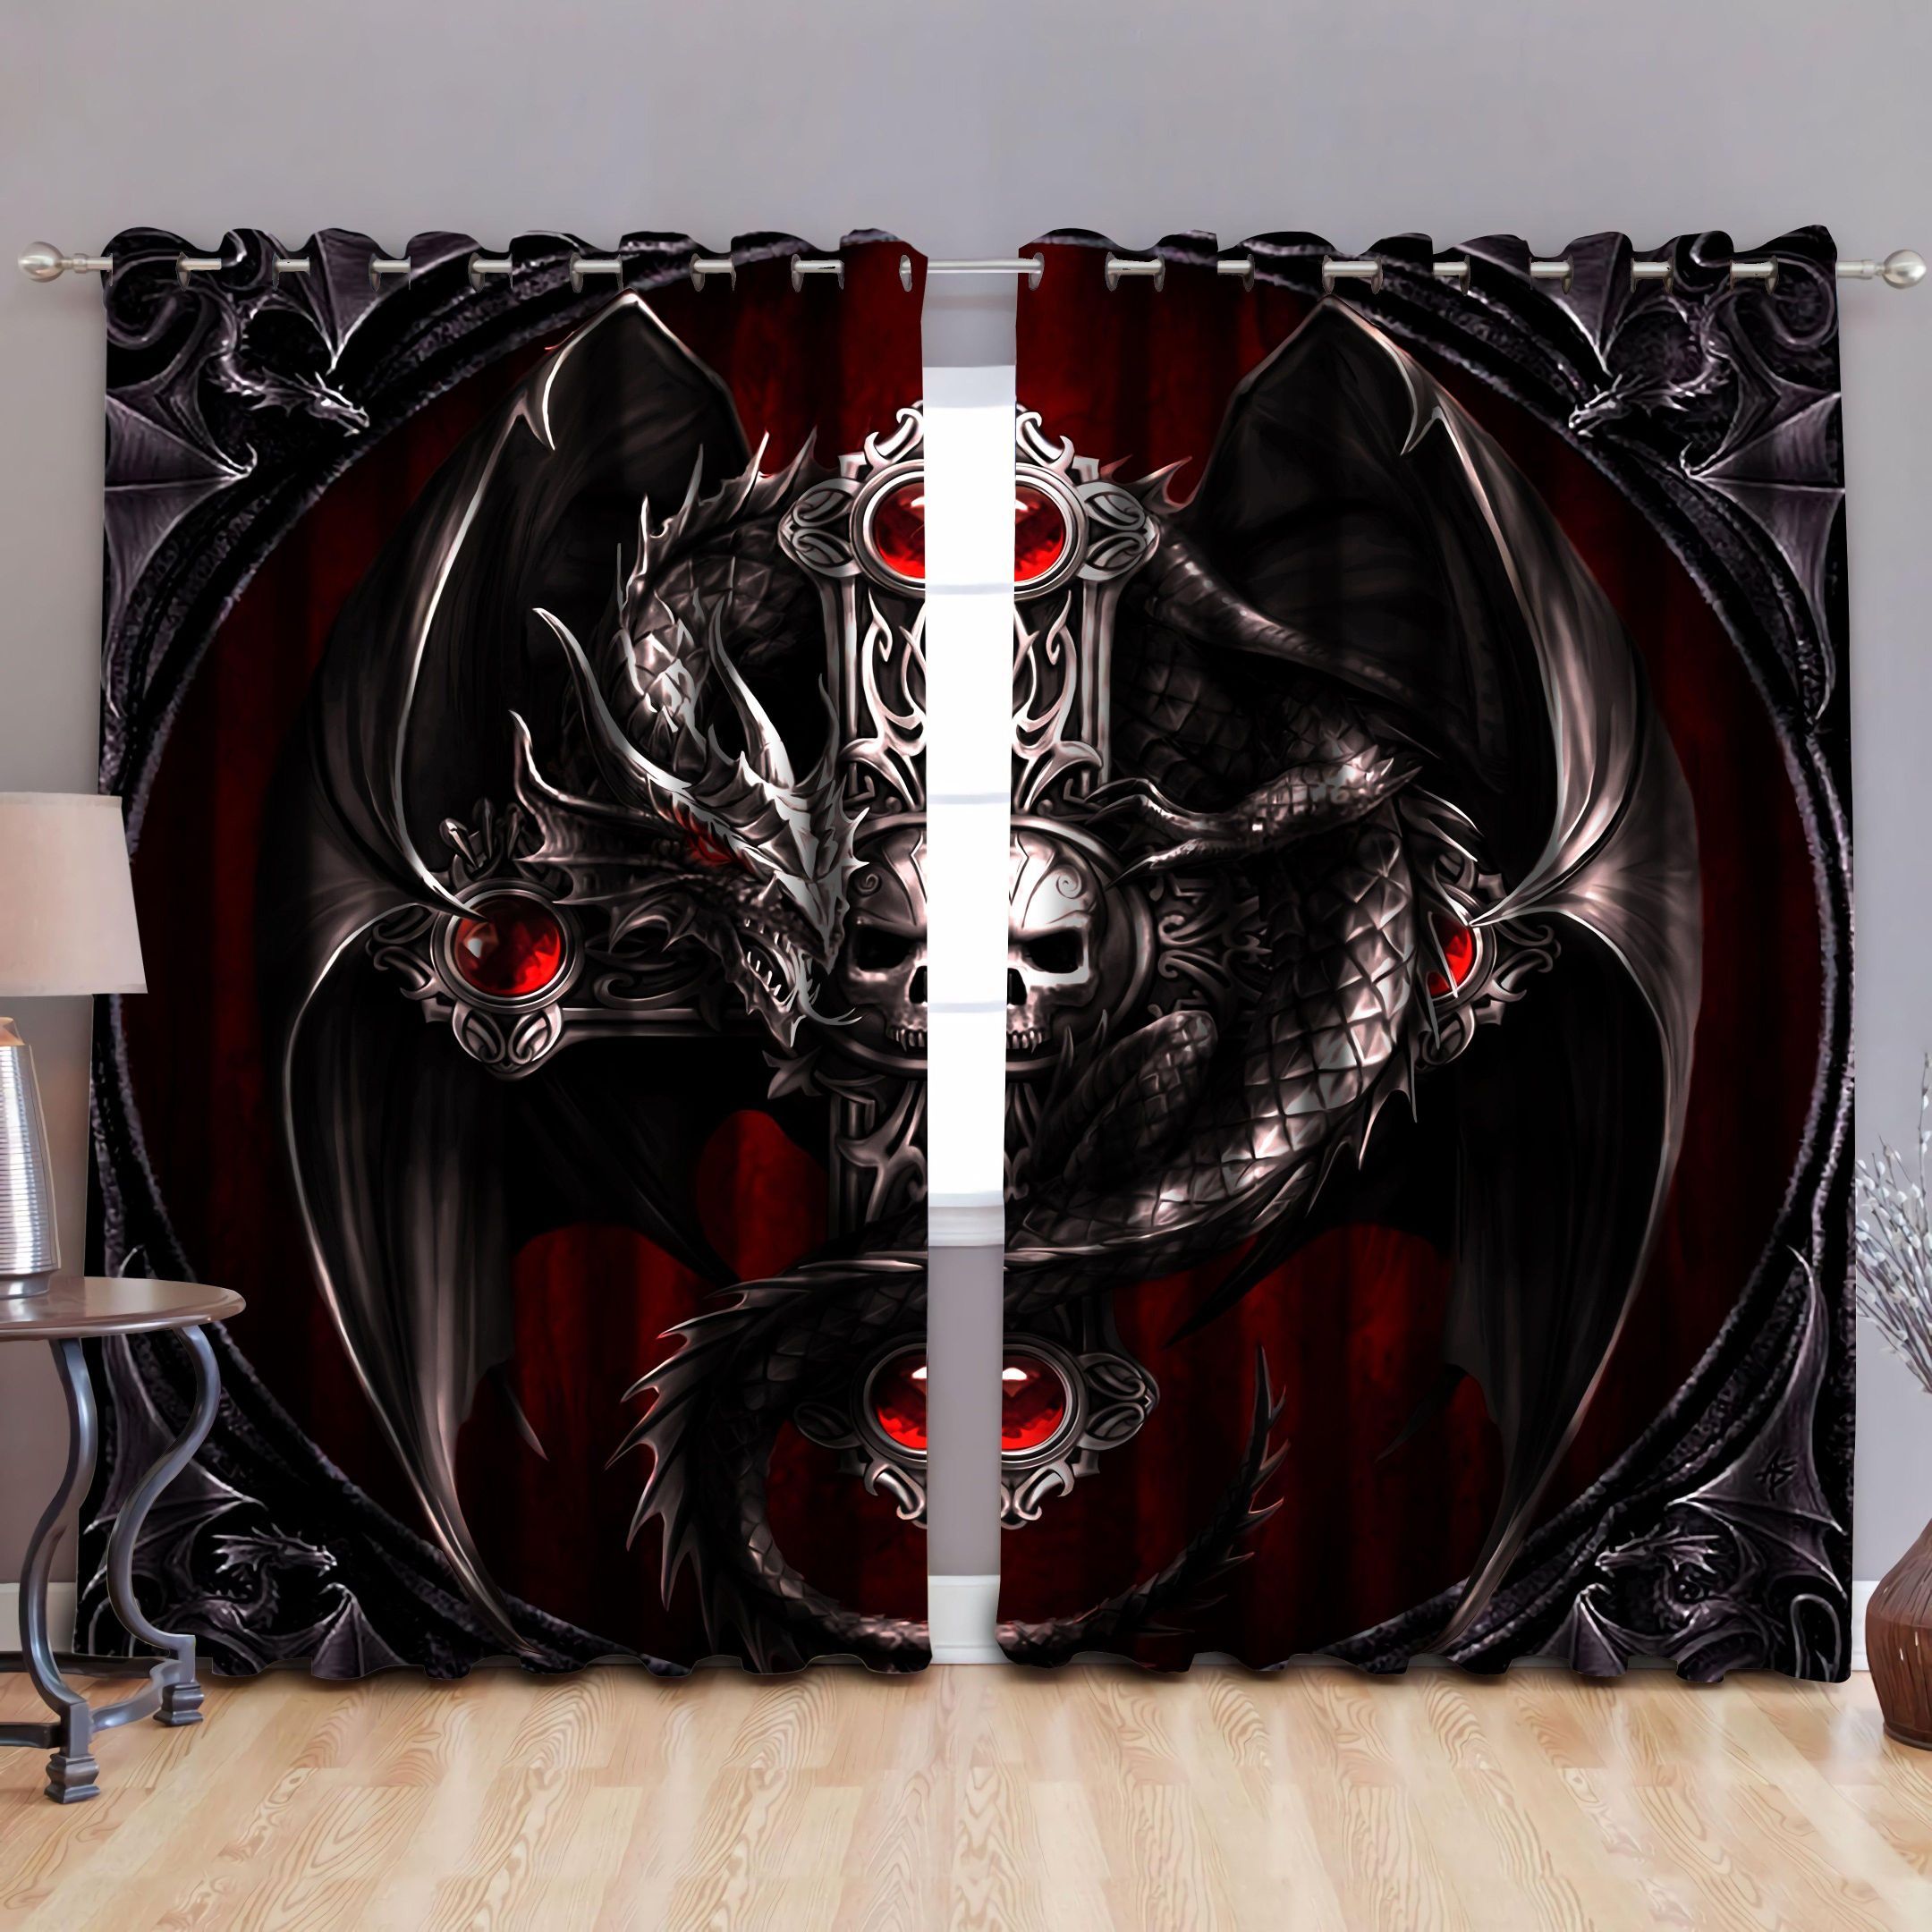 Black Dragon Skull The Weapon Printed Window Curtain - Dragon Blackout Curtains